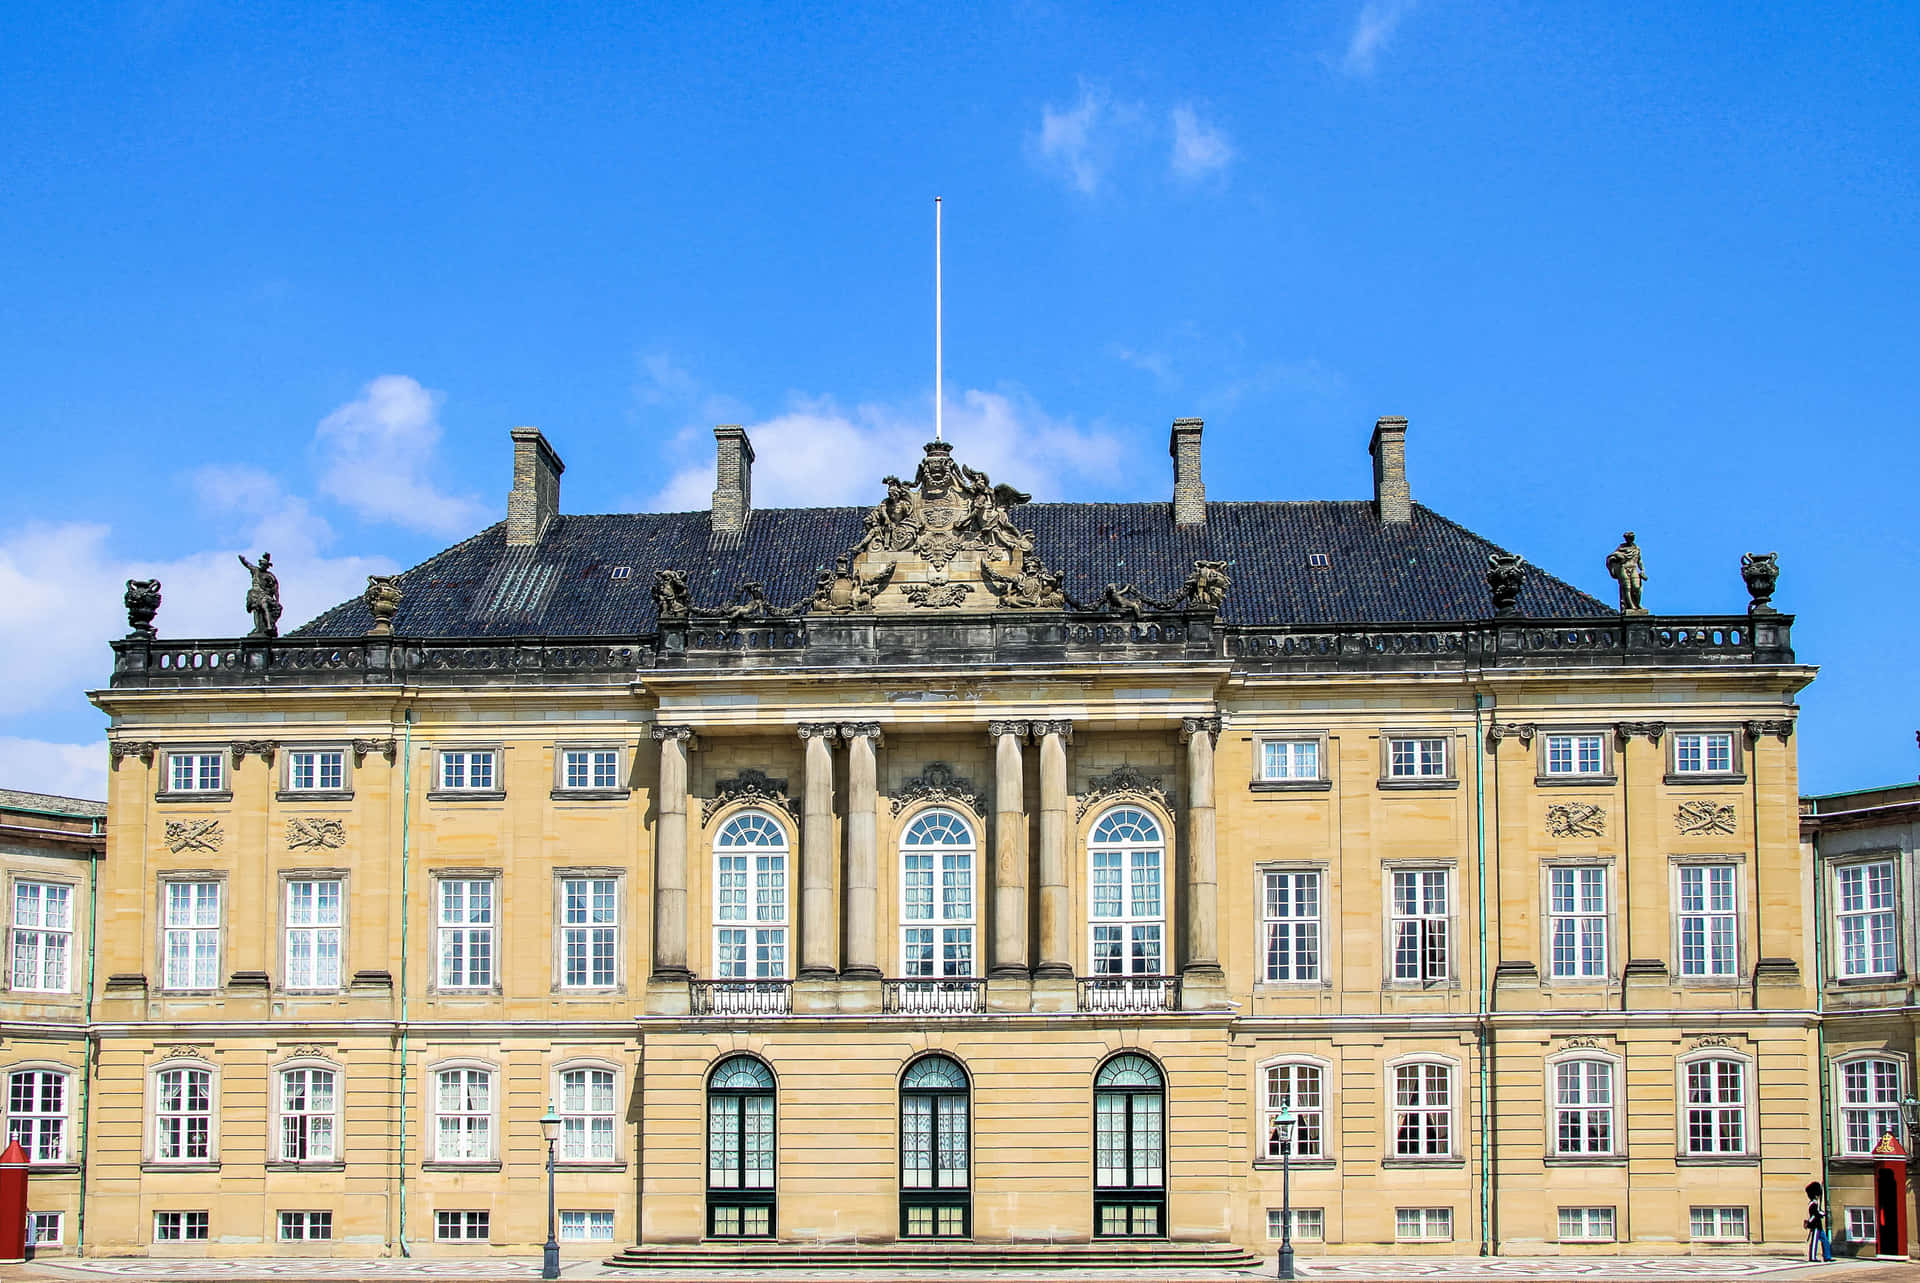 Architectural Designs In Amalienborg Palace Wallpaper